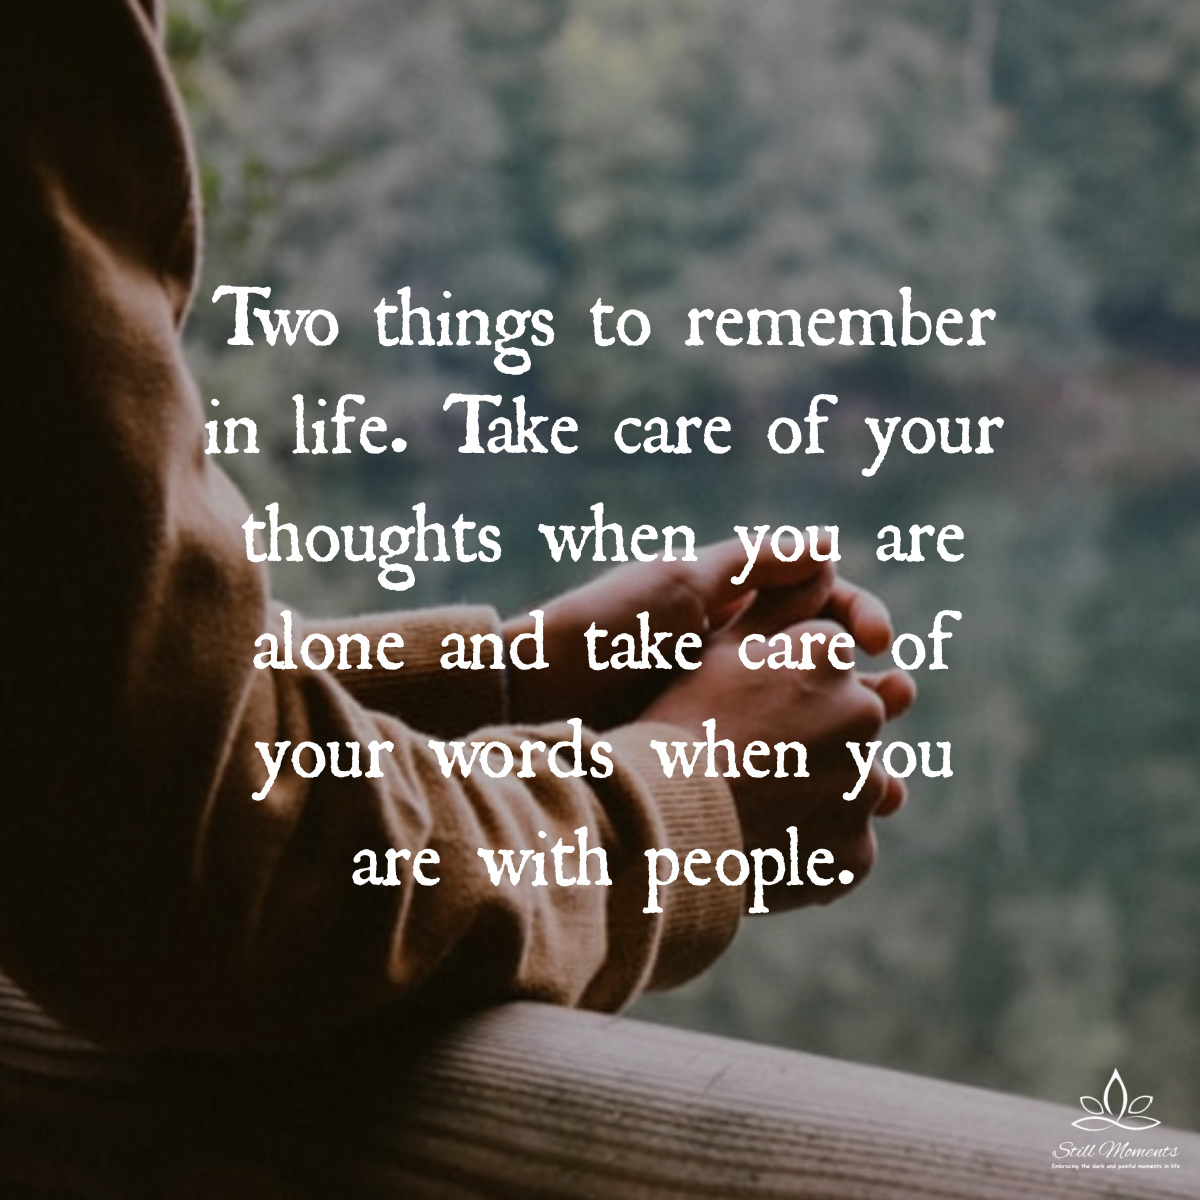 Two things to remember in life: take care of your thoughts when you’re alone, and take care of your words when you’re with people.